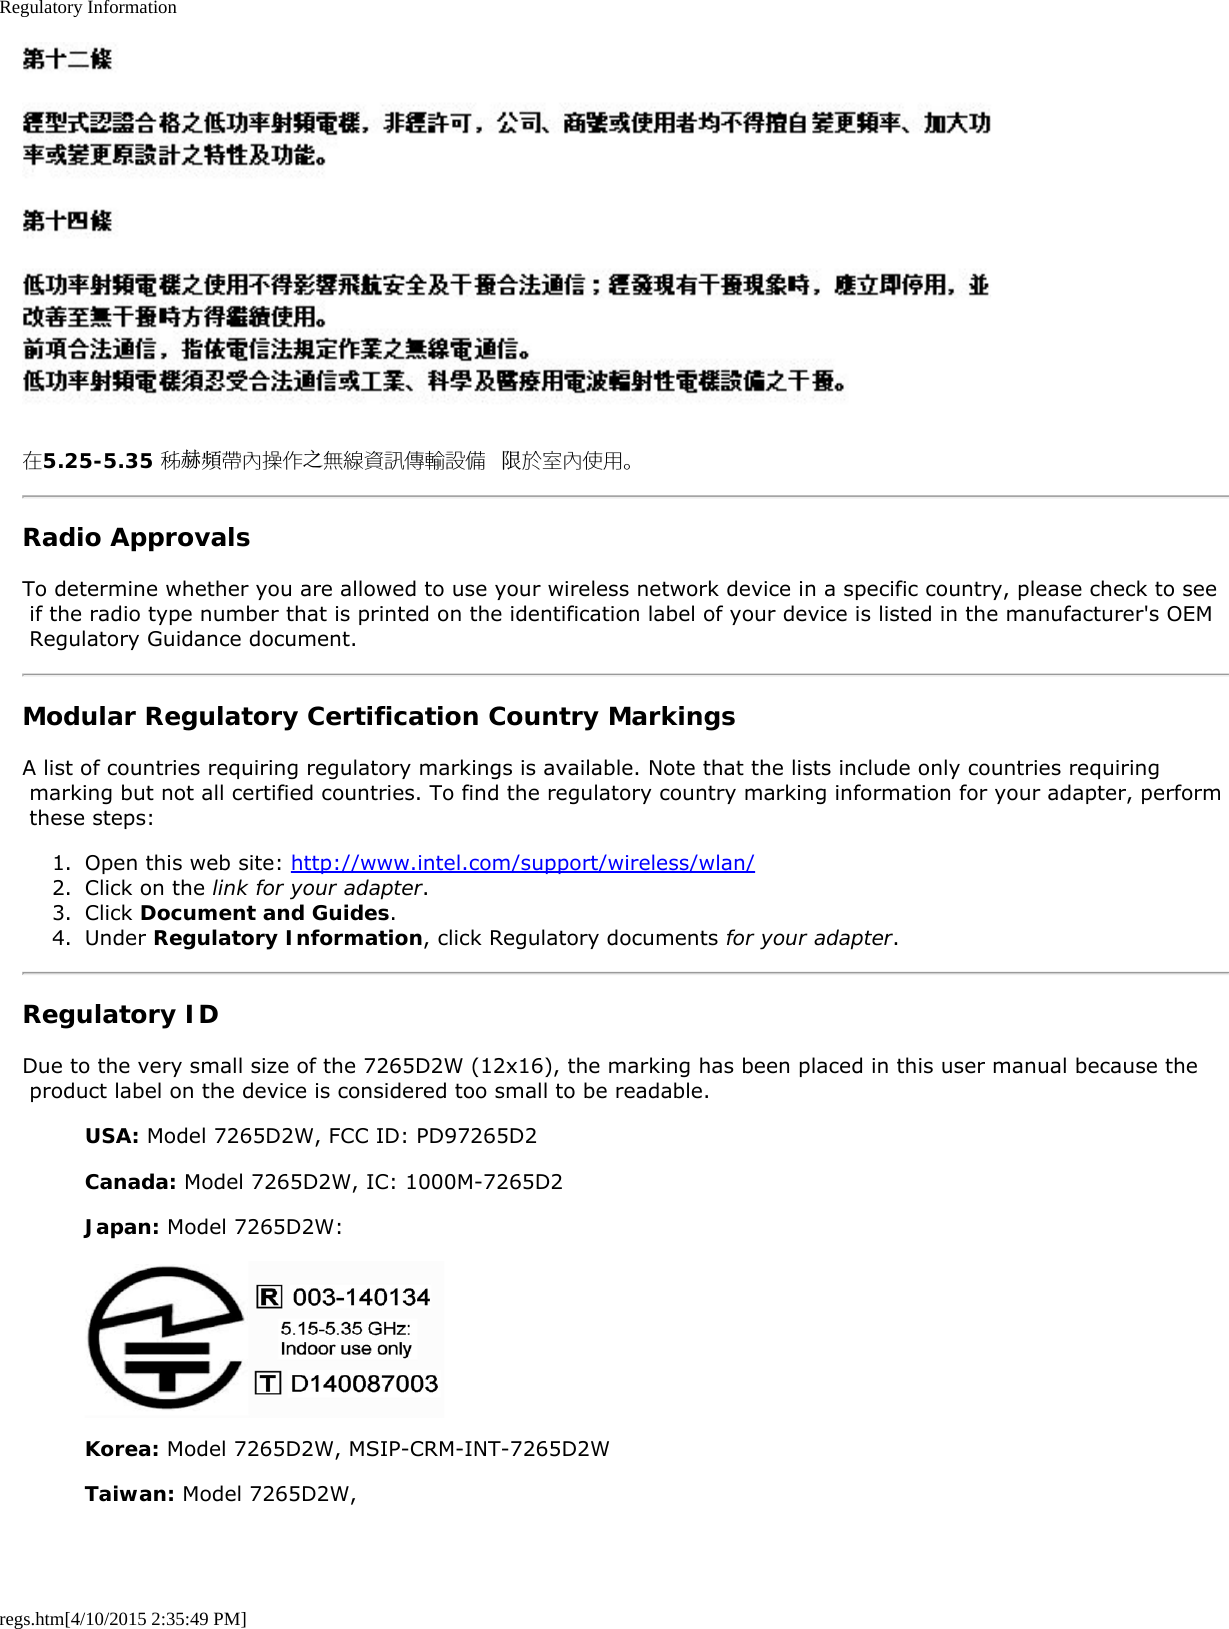 Regulatory Informationregs.htm[4/10/2015 2:35:49 PM]在5.25-5.35 秭赫頻帶內操作之無線資訊傳輸設備 限於室內使用。Radio ApprovalsTo determine whether you are allowed to use your wireless network device in a specific country, please check to see if the radio type number that is printed on the identification label of your device is listed in the manufacturer&apos;s OEM Regulatory Guidance document.Modular Regulatory Certification Country MarkingsA list of countries requiring regulatory markings is available. Note that the lists include only countries requiring marking but not all certified countries. To find the regulatory country marking information for your adapter, perform these steps:1.  Open this web site: http://www.intel.com/support/wireless/wlan/2.  Click on the link for your adapter.3.  Click Document and Guides.4.  Under Regulatory Information, click Regulatory documents for your adapter.Regulatory IDDue to the very small size of the 7265D2W (12x16), the marking has been placed in this user manual because the product label on the device is considered too small to be readable.USA: Model 7265D2W, FCC ID: PD97265D2Canada: Model 7265D2W, IC: 1000M-7265D2Japan: Model 7265D2W:Korea: Model 7265D2W, MSIP-CRM-INT-7265D2WTaiwan: Model 7265D2W,